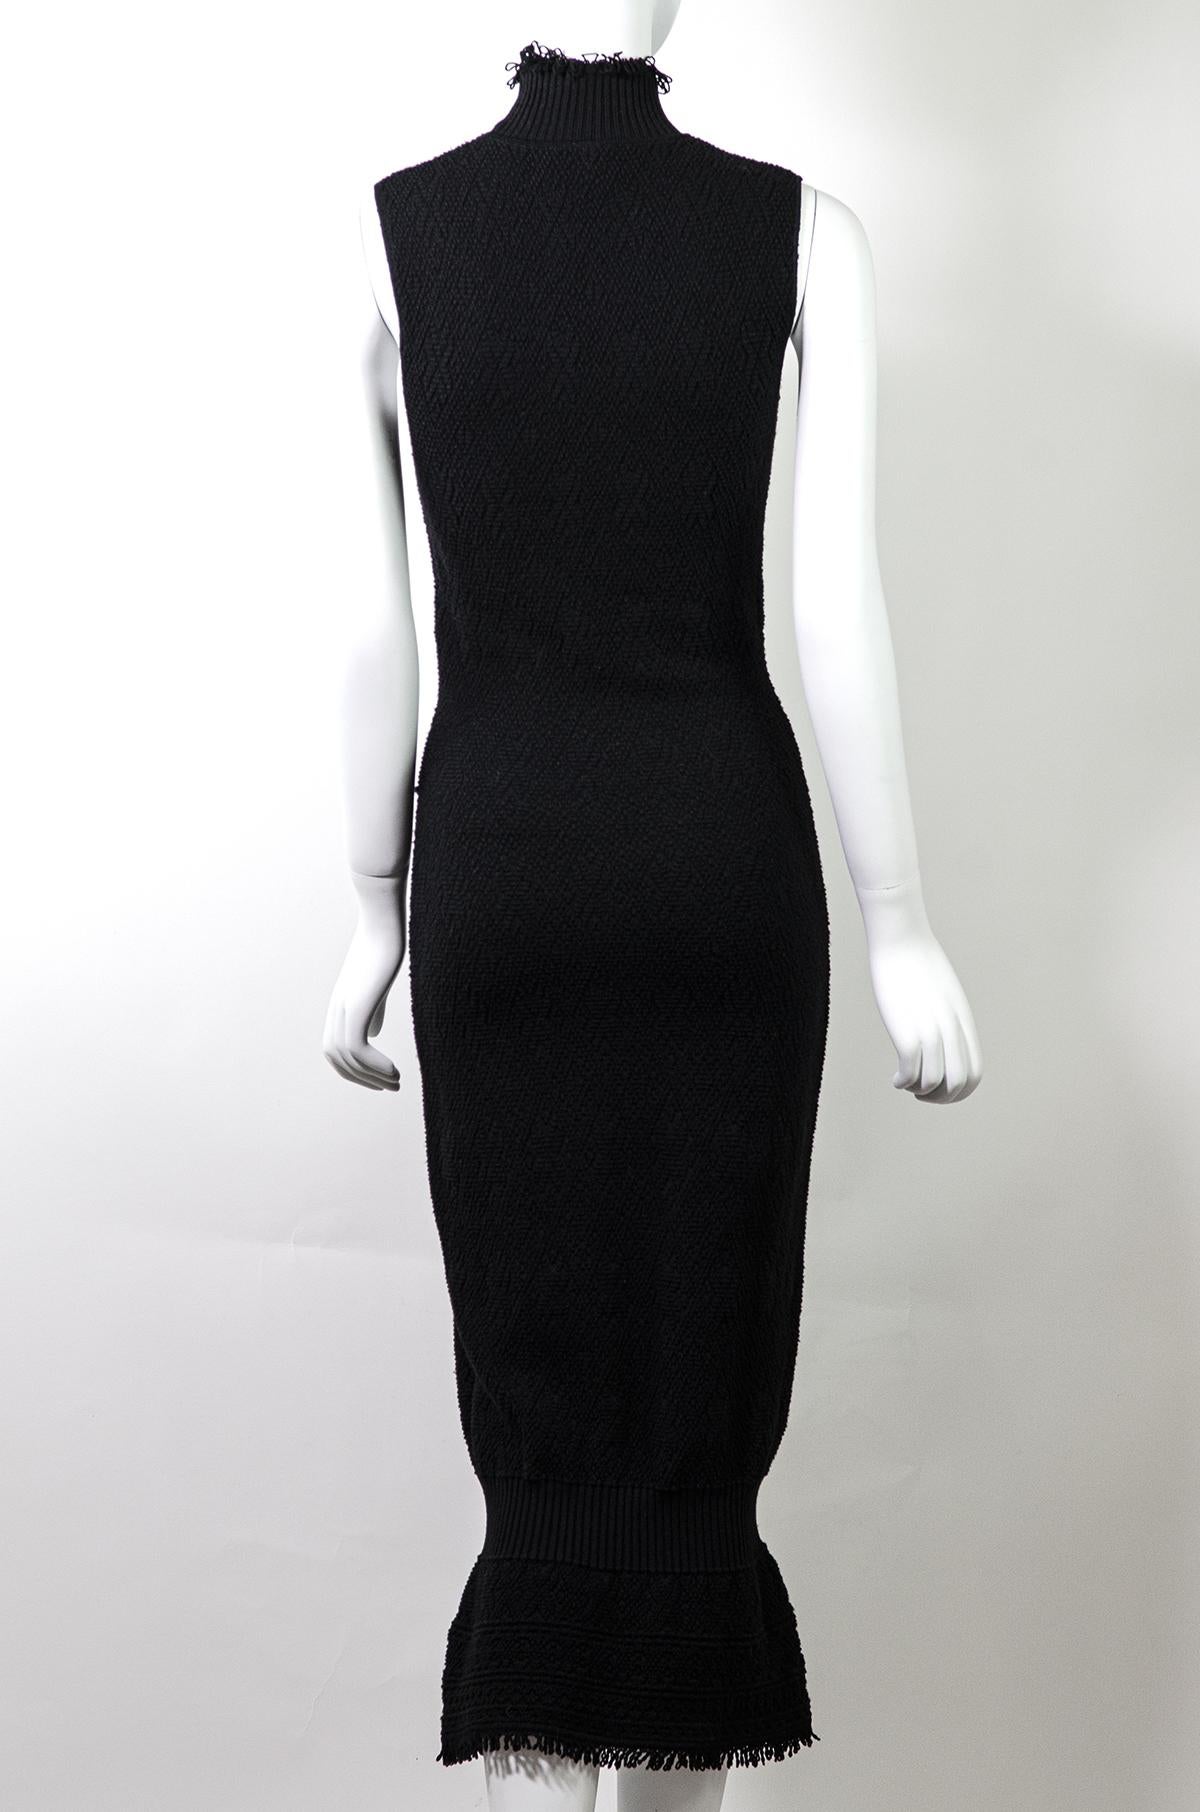 Women's CHRISTIAN DIOR by JOHN GALLIANO F/W 1999 Textured Knit Dress FR40 For Sale